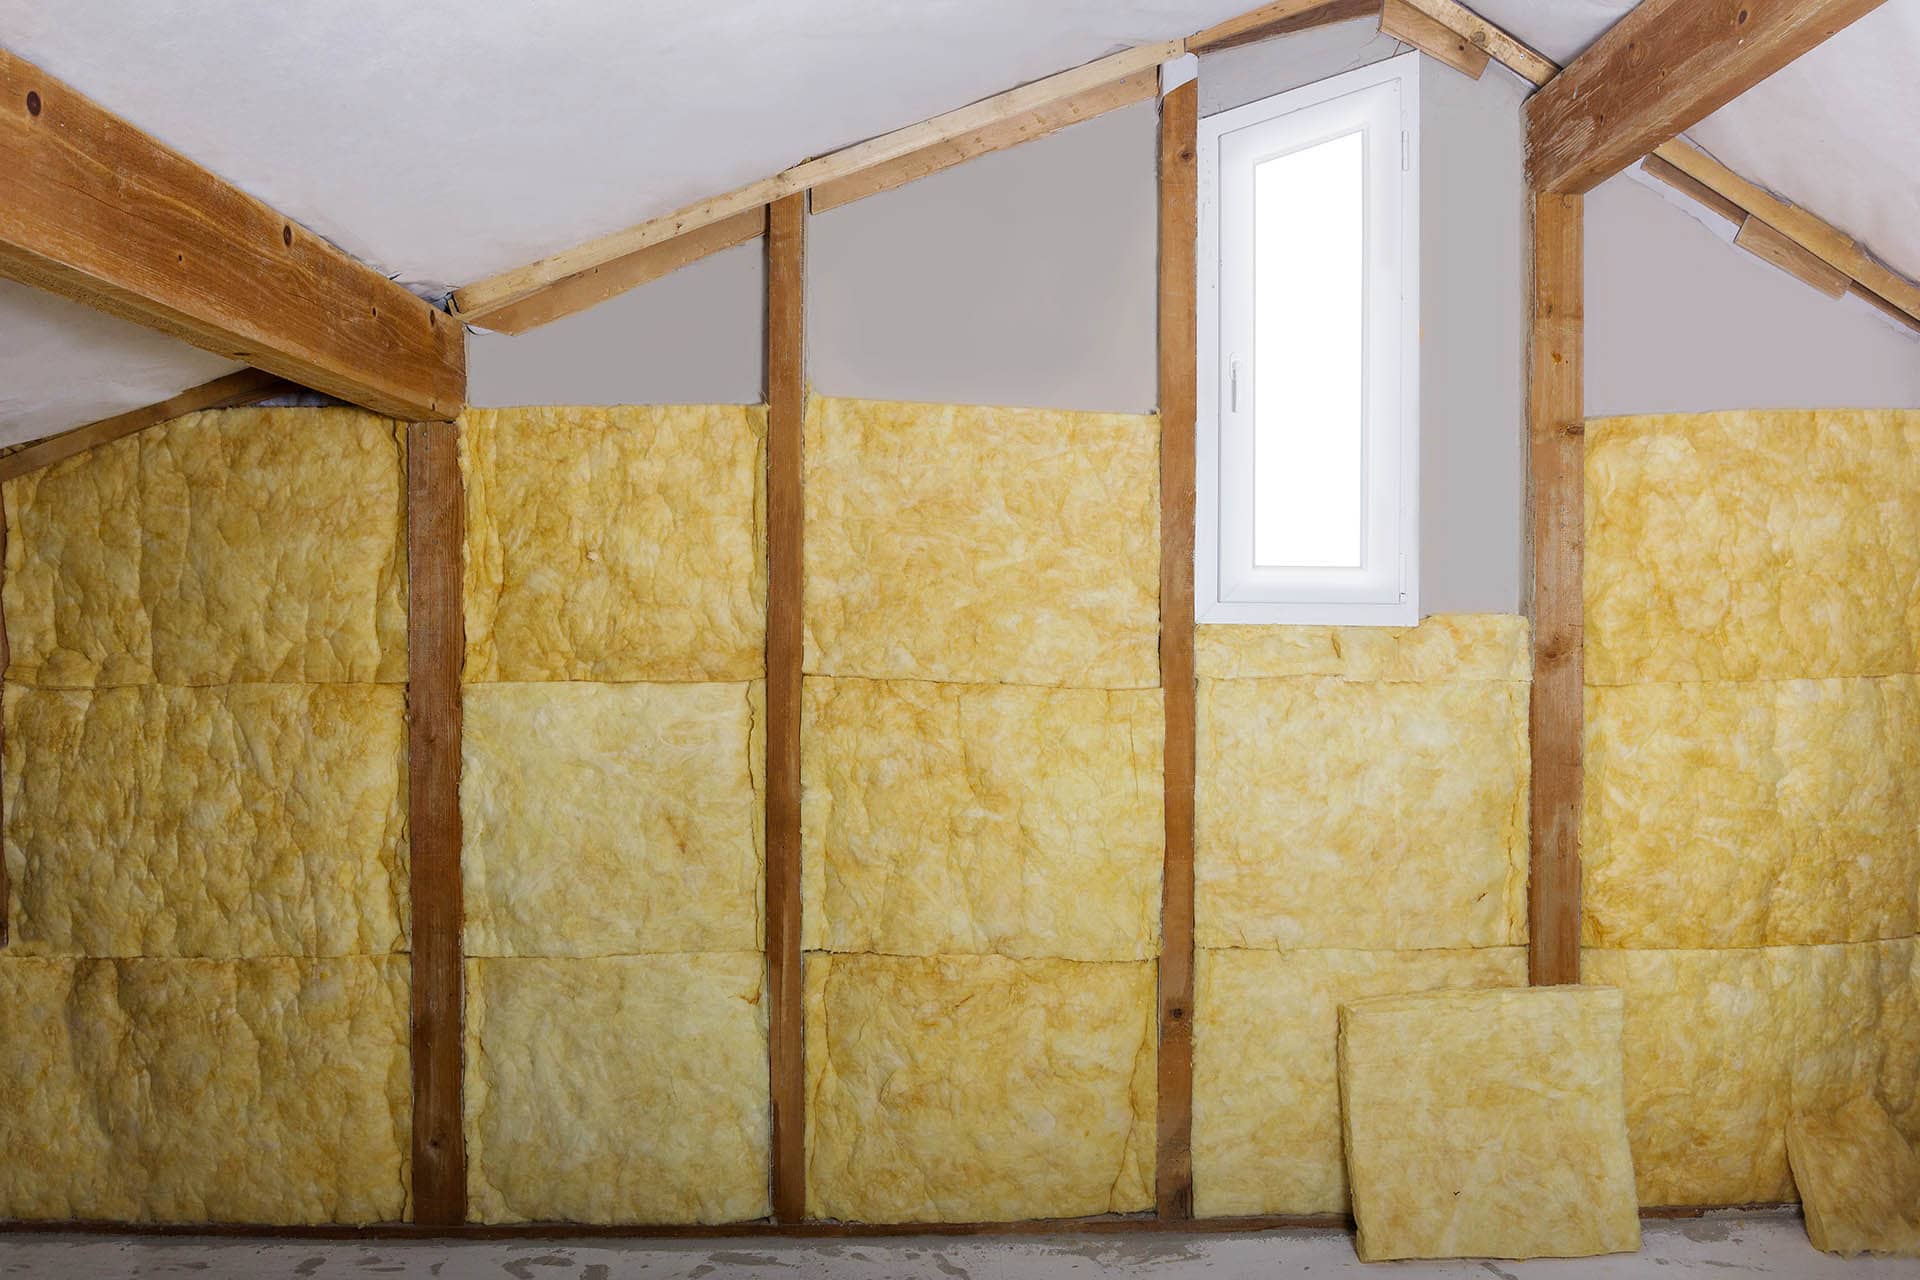 Thermal insulation installed in property - building materials